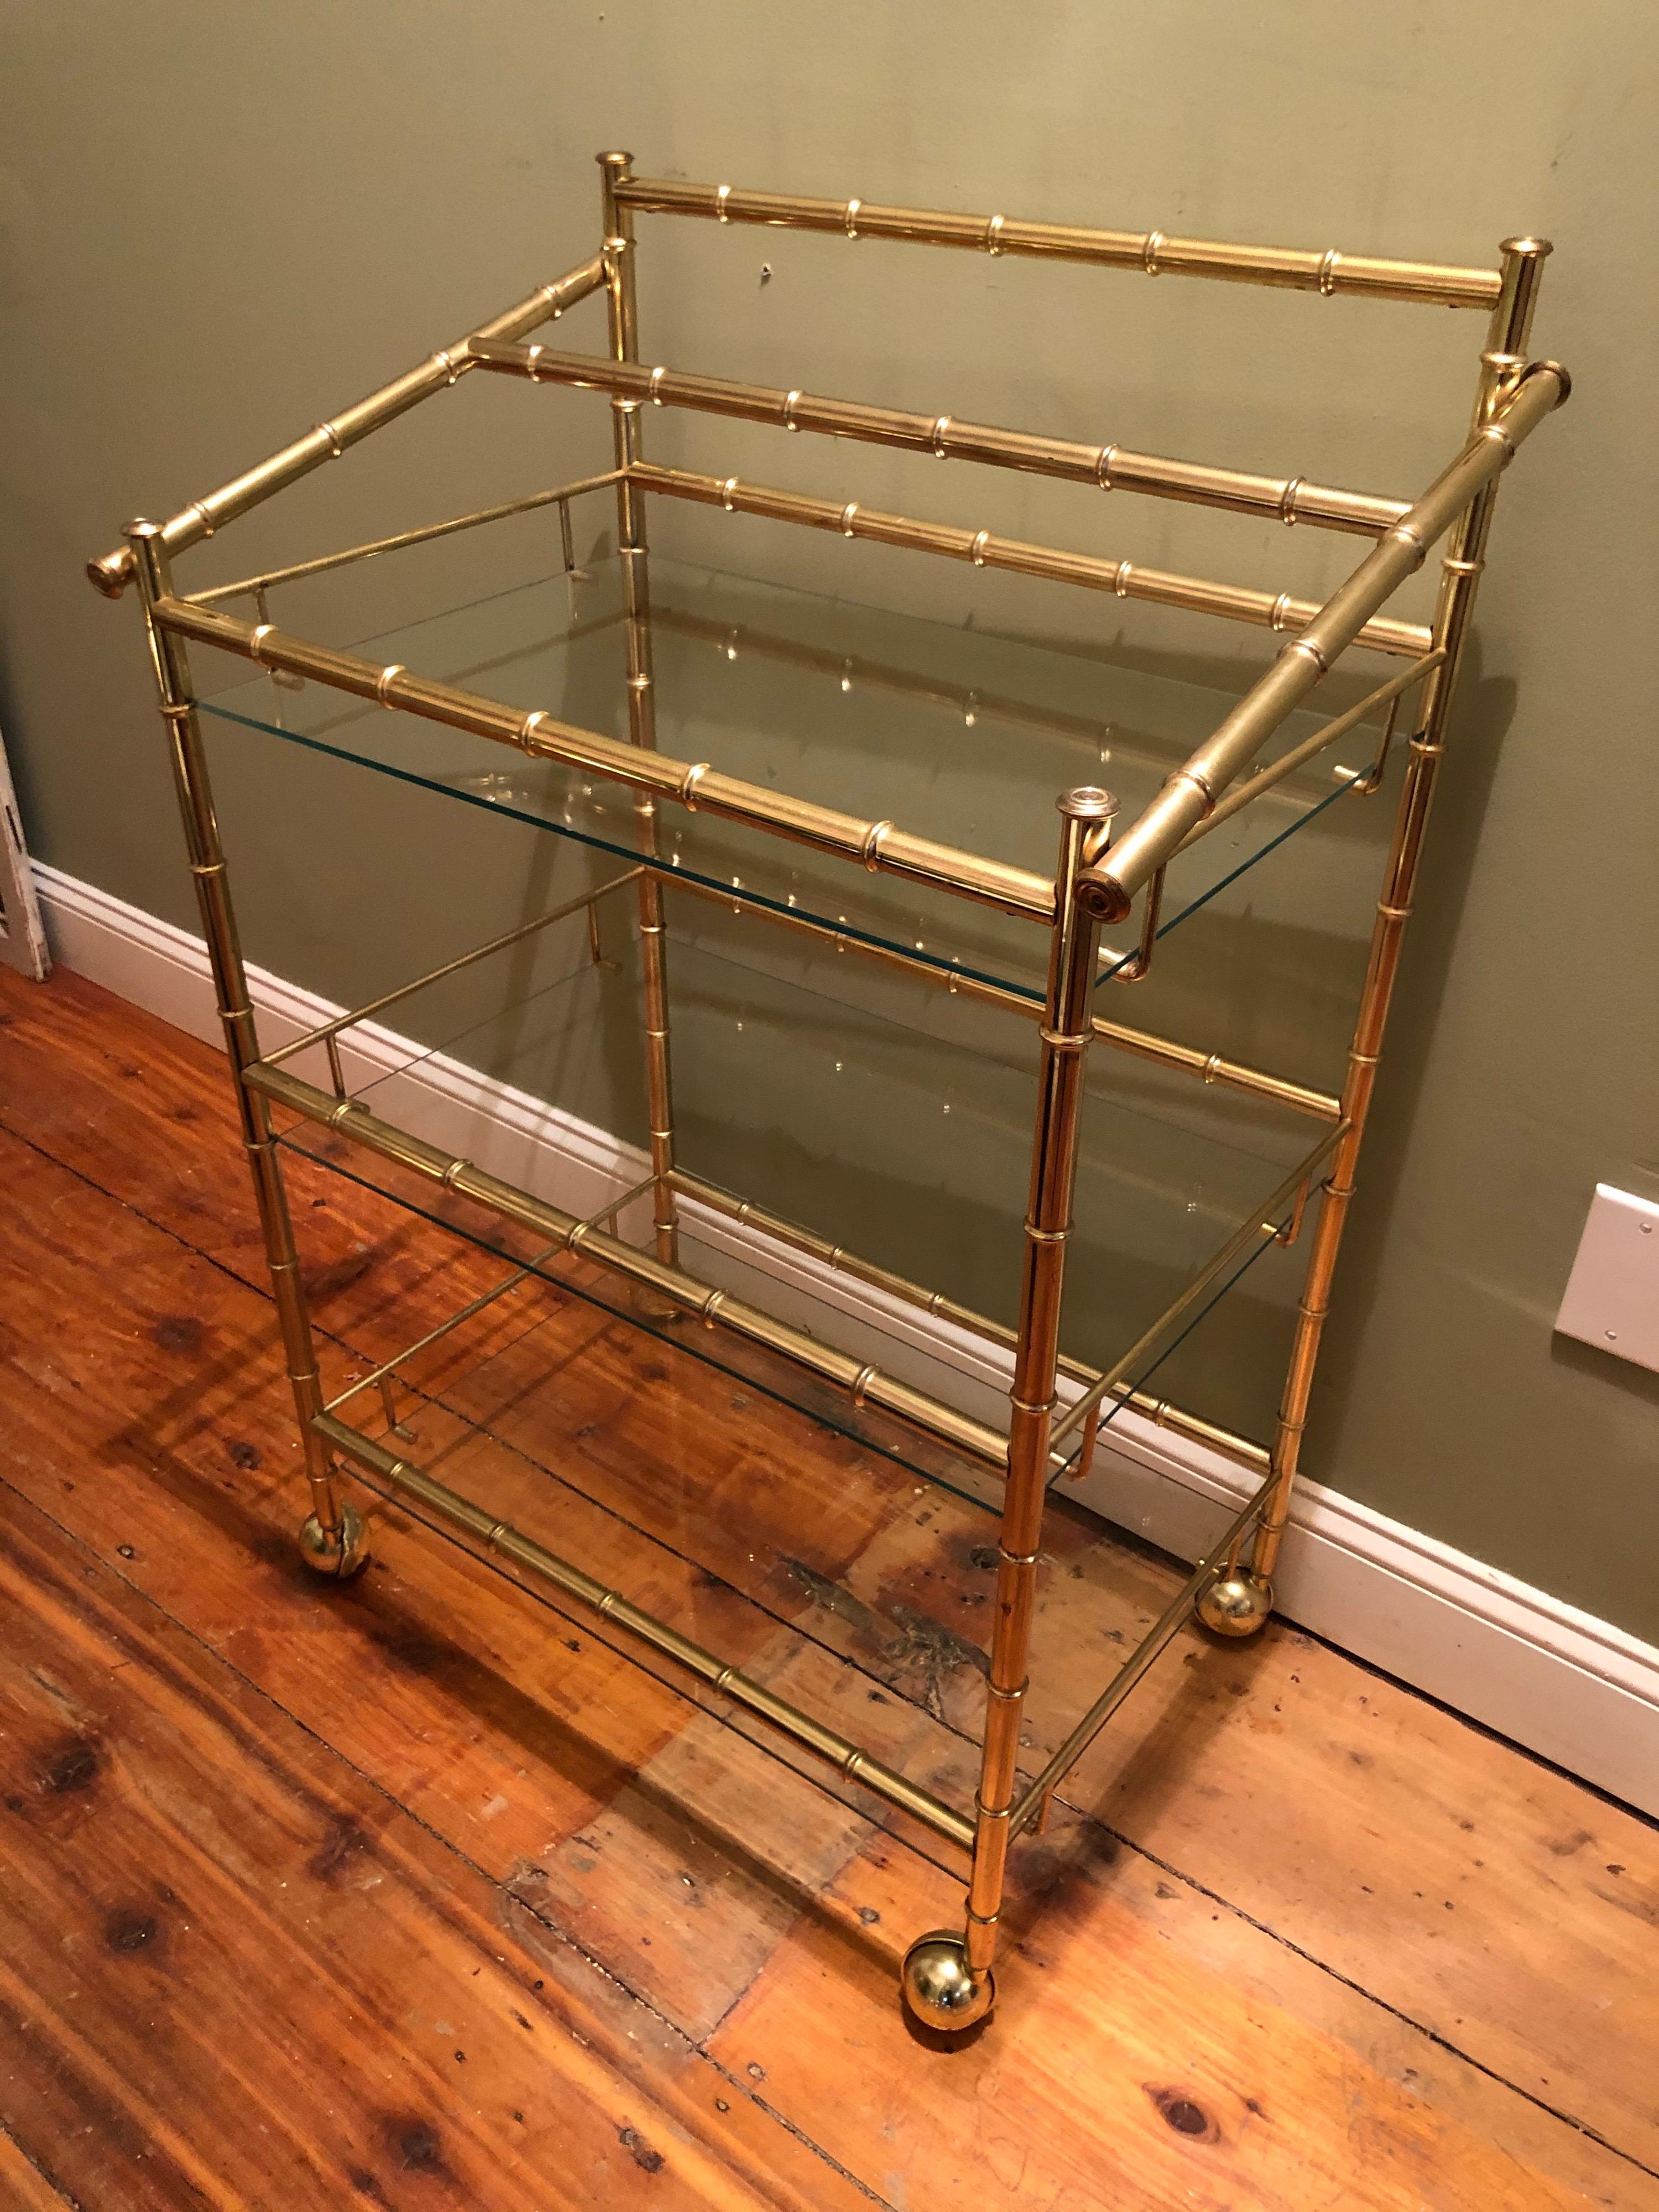 Three-tiered brass bamboo bar cart. The perfect entertaining piece. Lightweight and easy to move around. Brass bamboo accent frame with clear glass shelves. Top tier has a place to hold bottles. Nice large round brass castors. There is a twelve inch